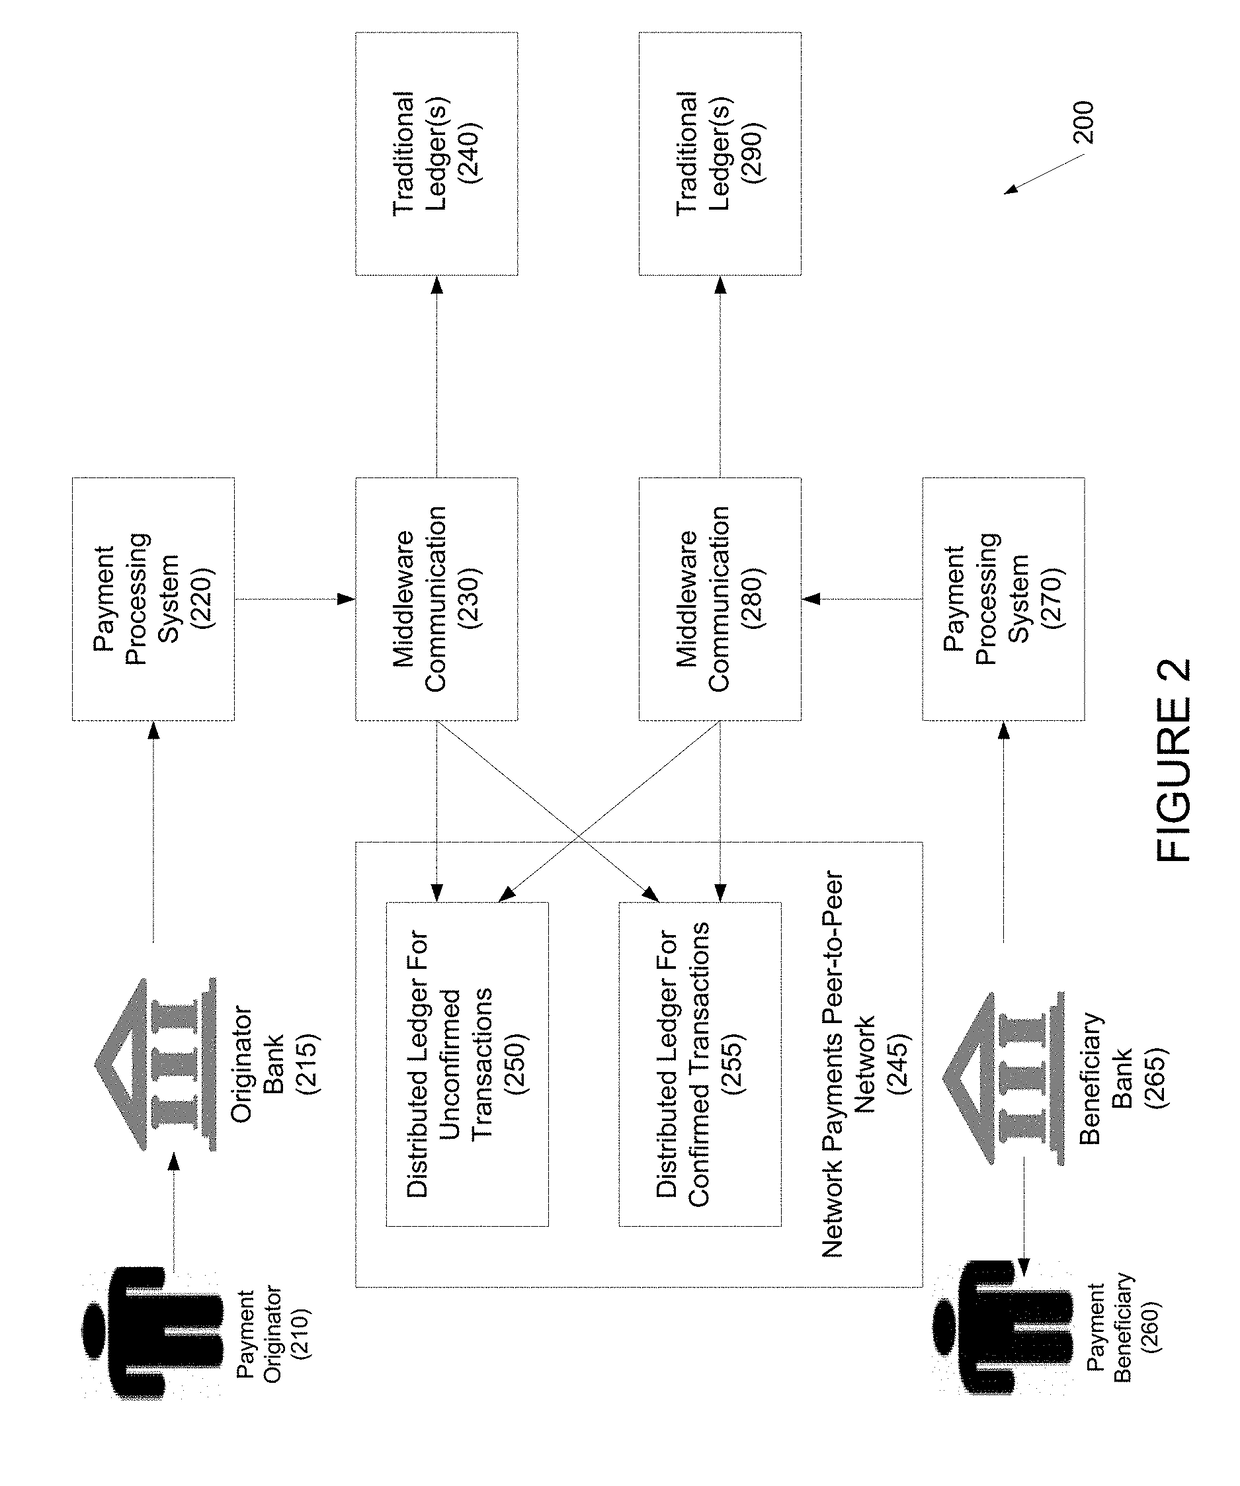 Systems and methods for the application of distributed ledgers for network payments as financial exchange settlement and reconciliation